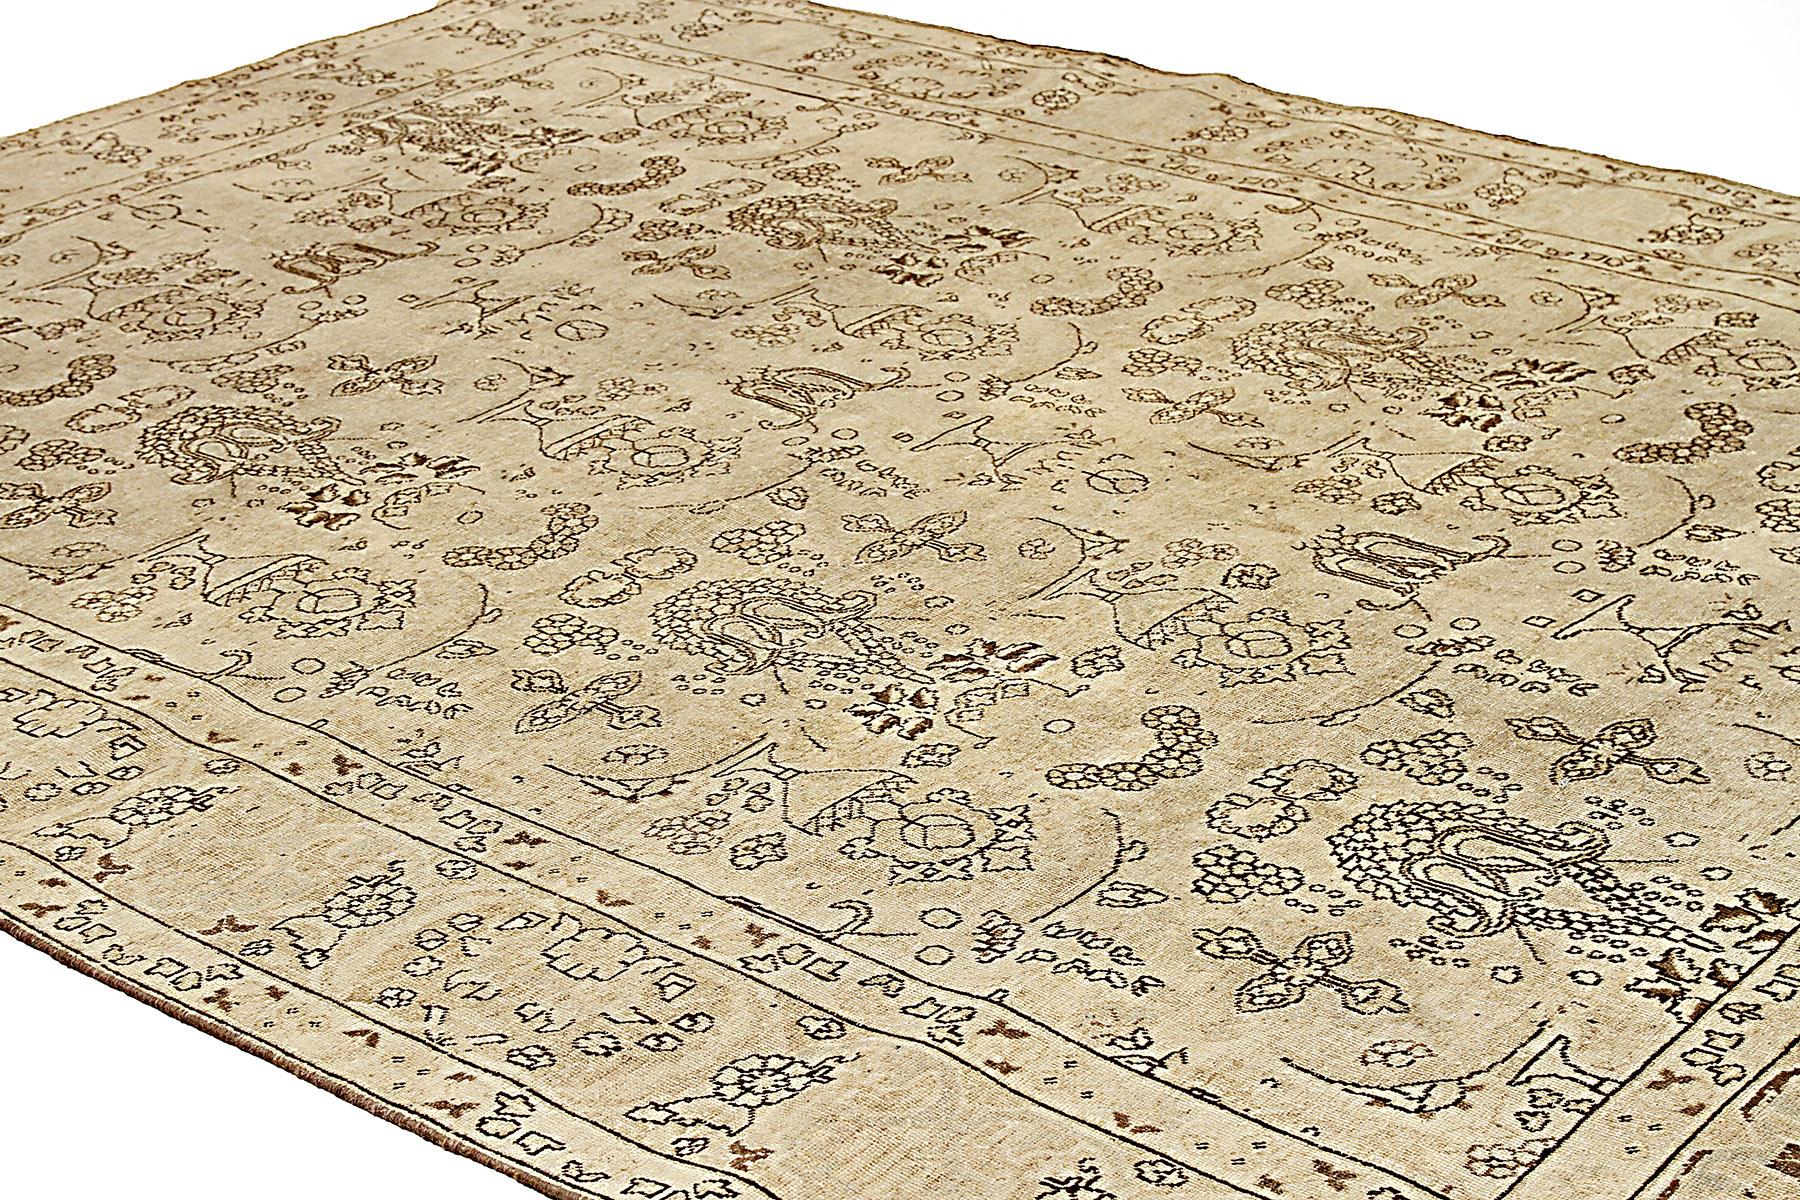 Hand-Woven 20th Century Antique Persian Tabriz Rug with Black Outline Floral Details For Sale